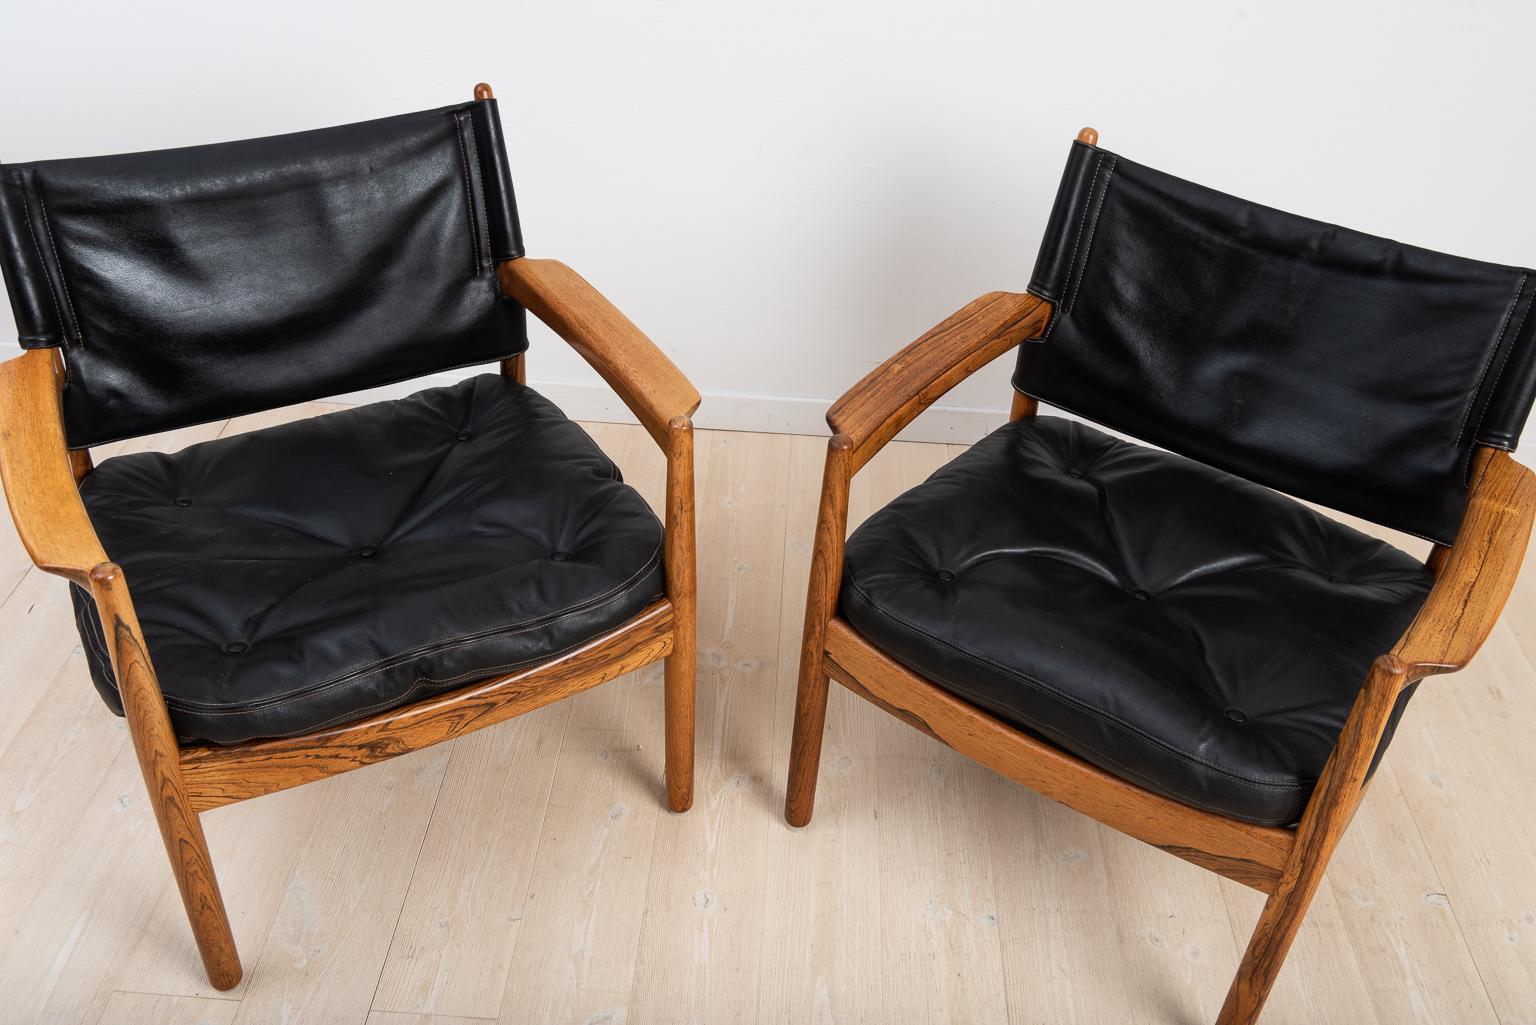 A pair of easy chairs by Gunnar Myrstrand manufactured by Källemo Sweden, 1960s. Frame manufactured by palisades. Backrest in leather. Detachable cushions upholstered in leather with button staples.